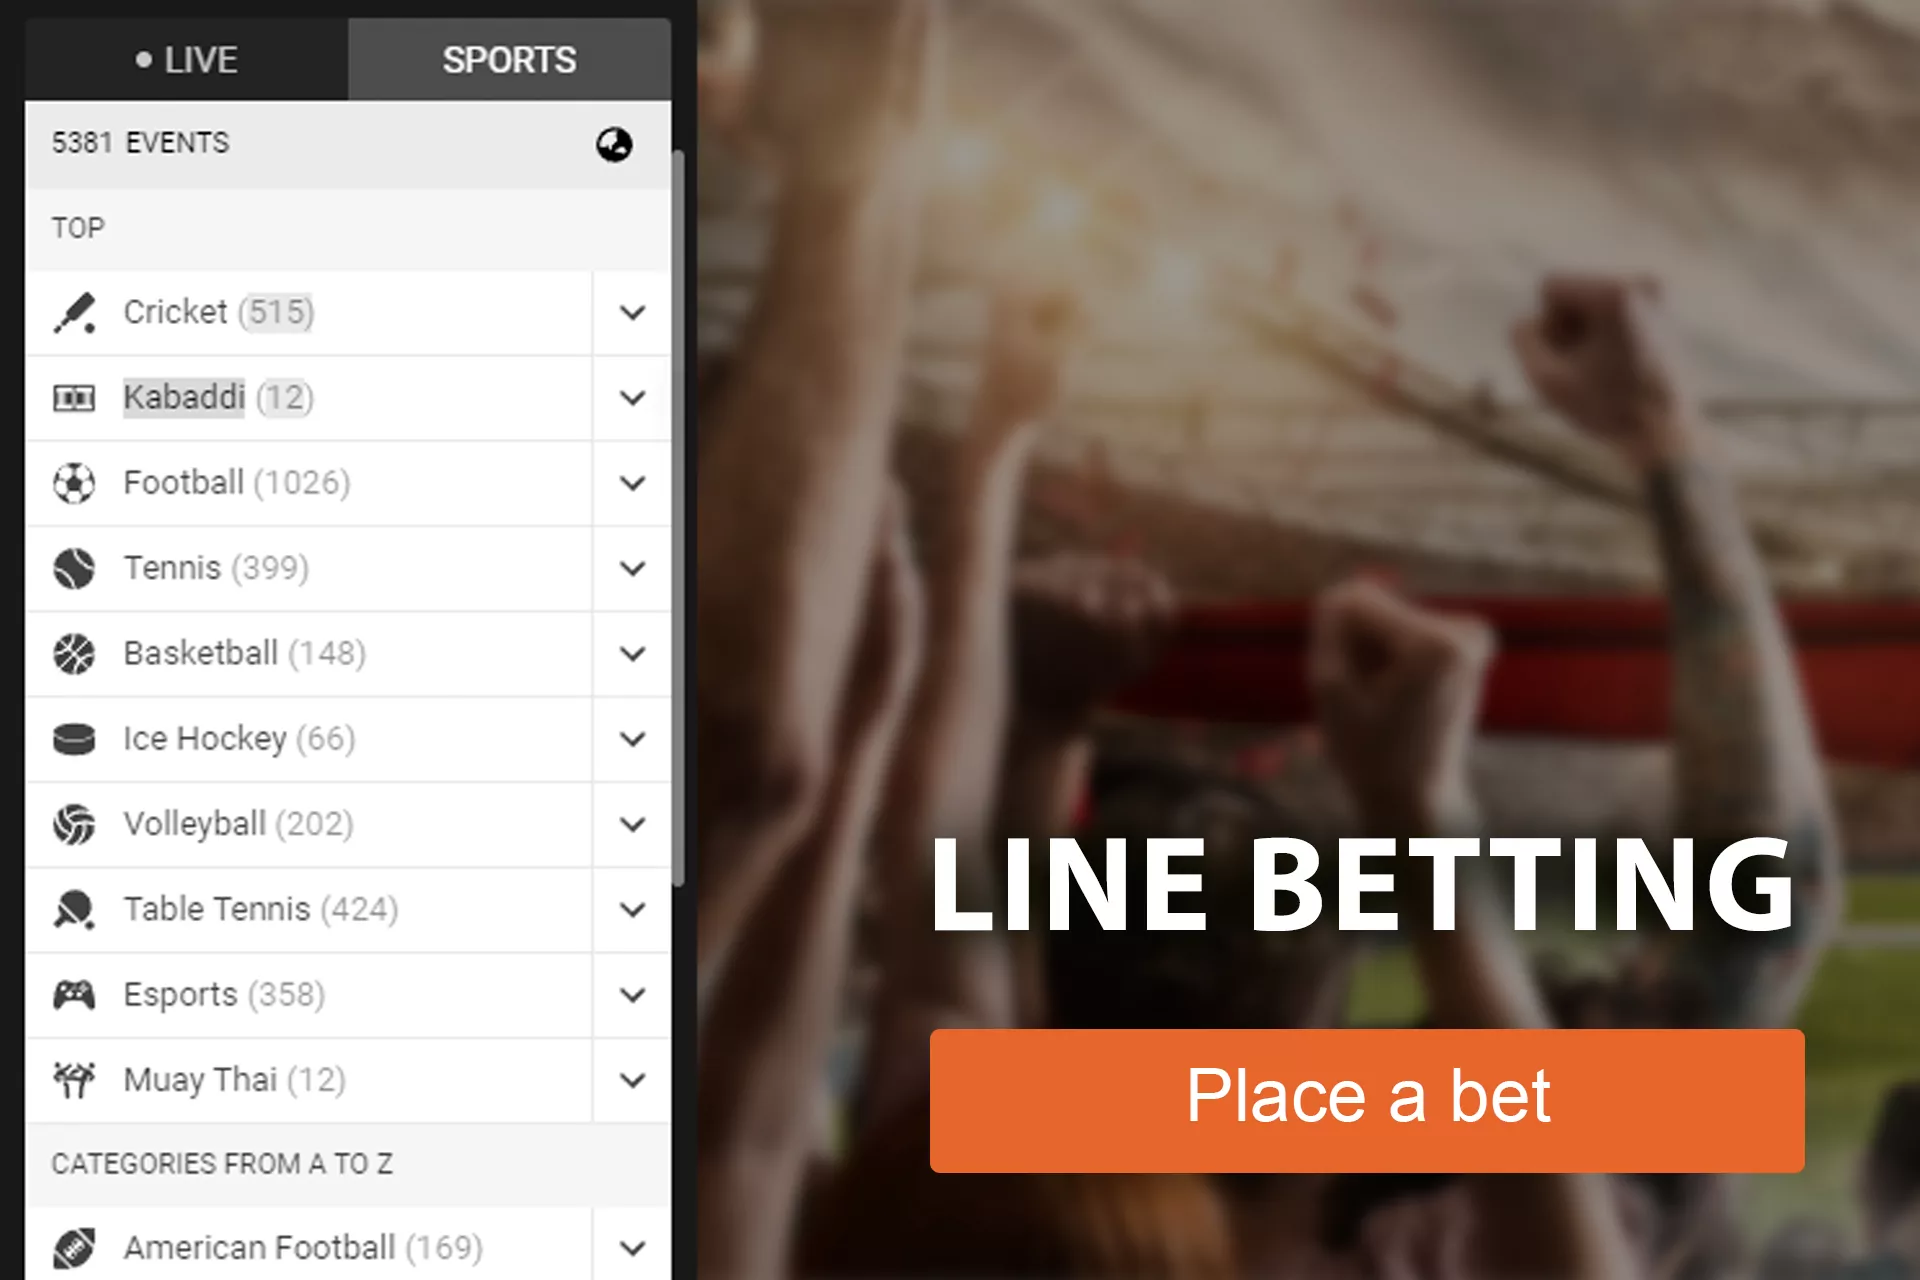 In the line, you find all the most important sports and sports events.